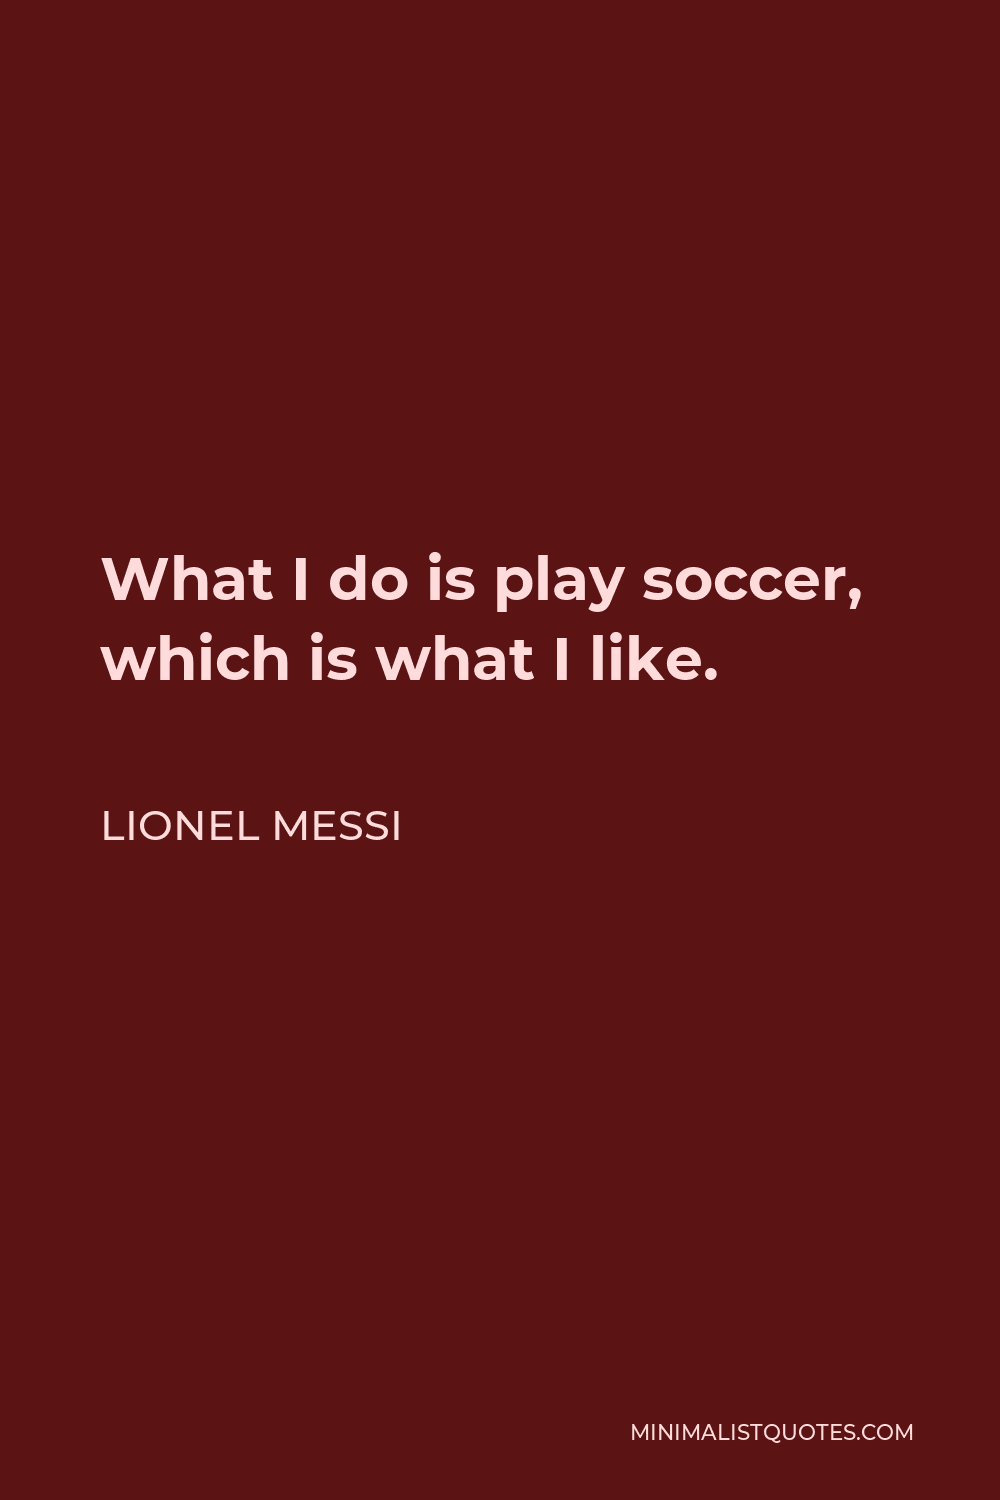 Lionel Messi Quote - What I do is play soccer, which is what I like.